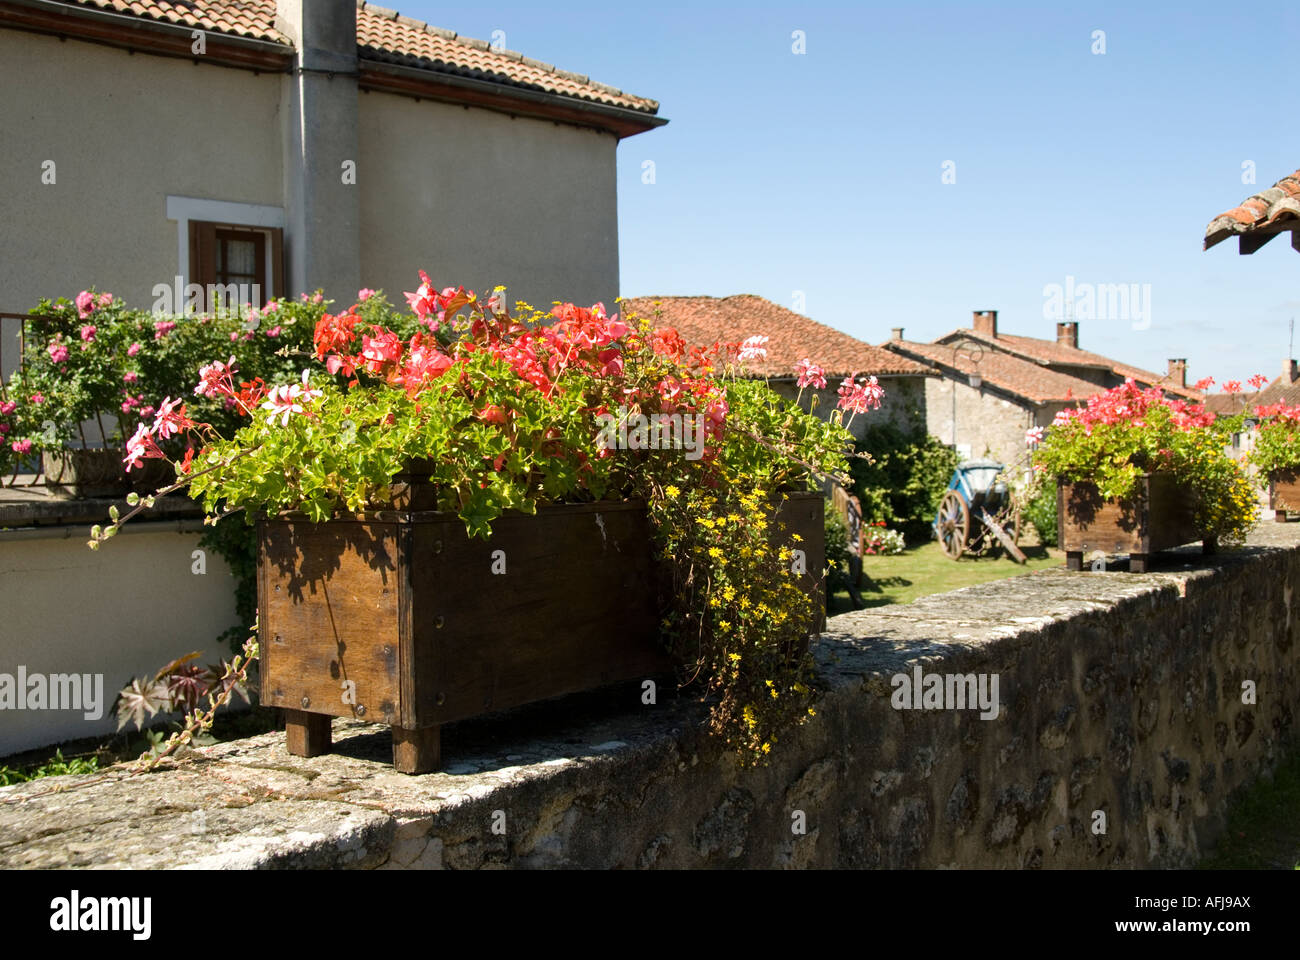 Image of a flower box in the village of Montrol Senard in the Limousin region of France Stock Photo